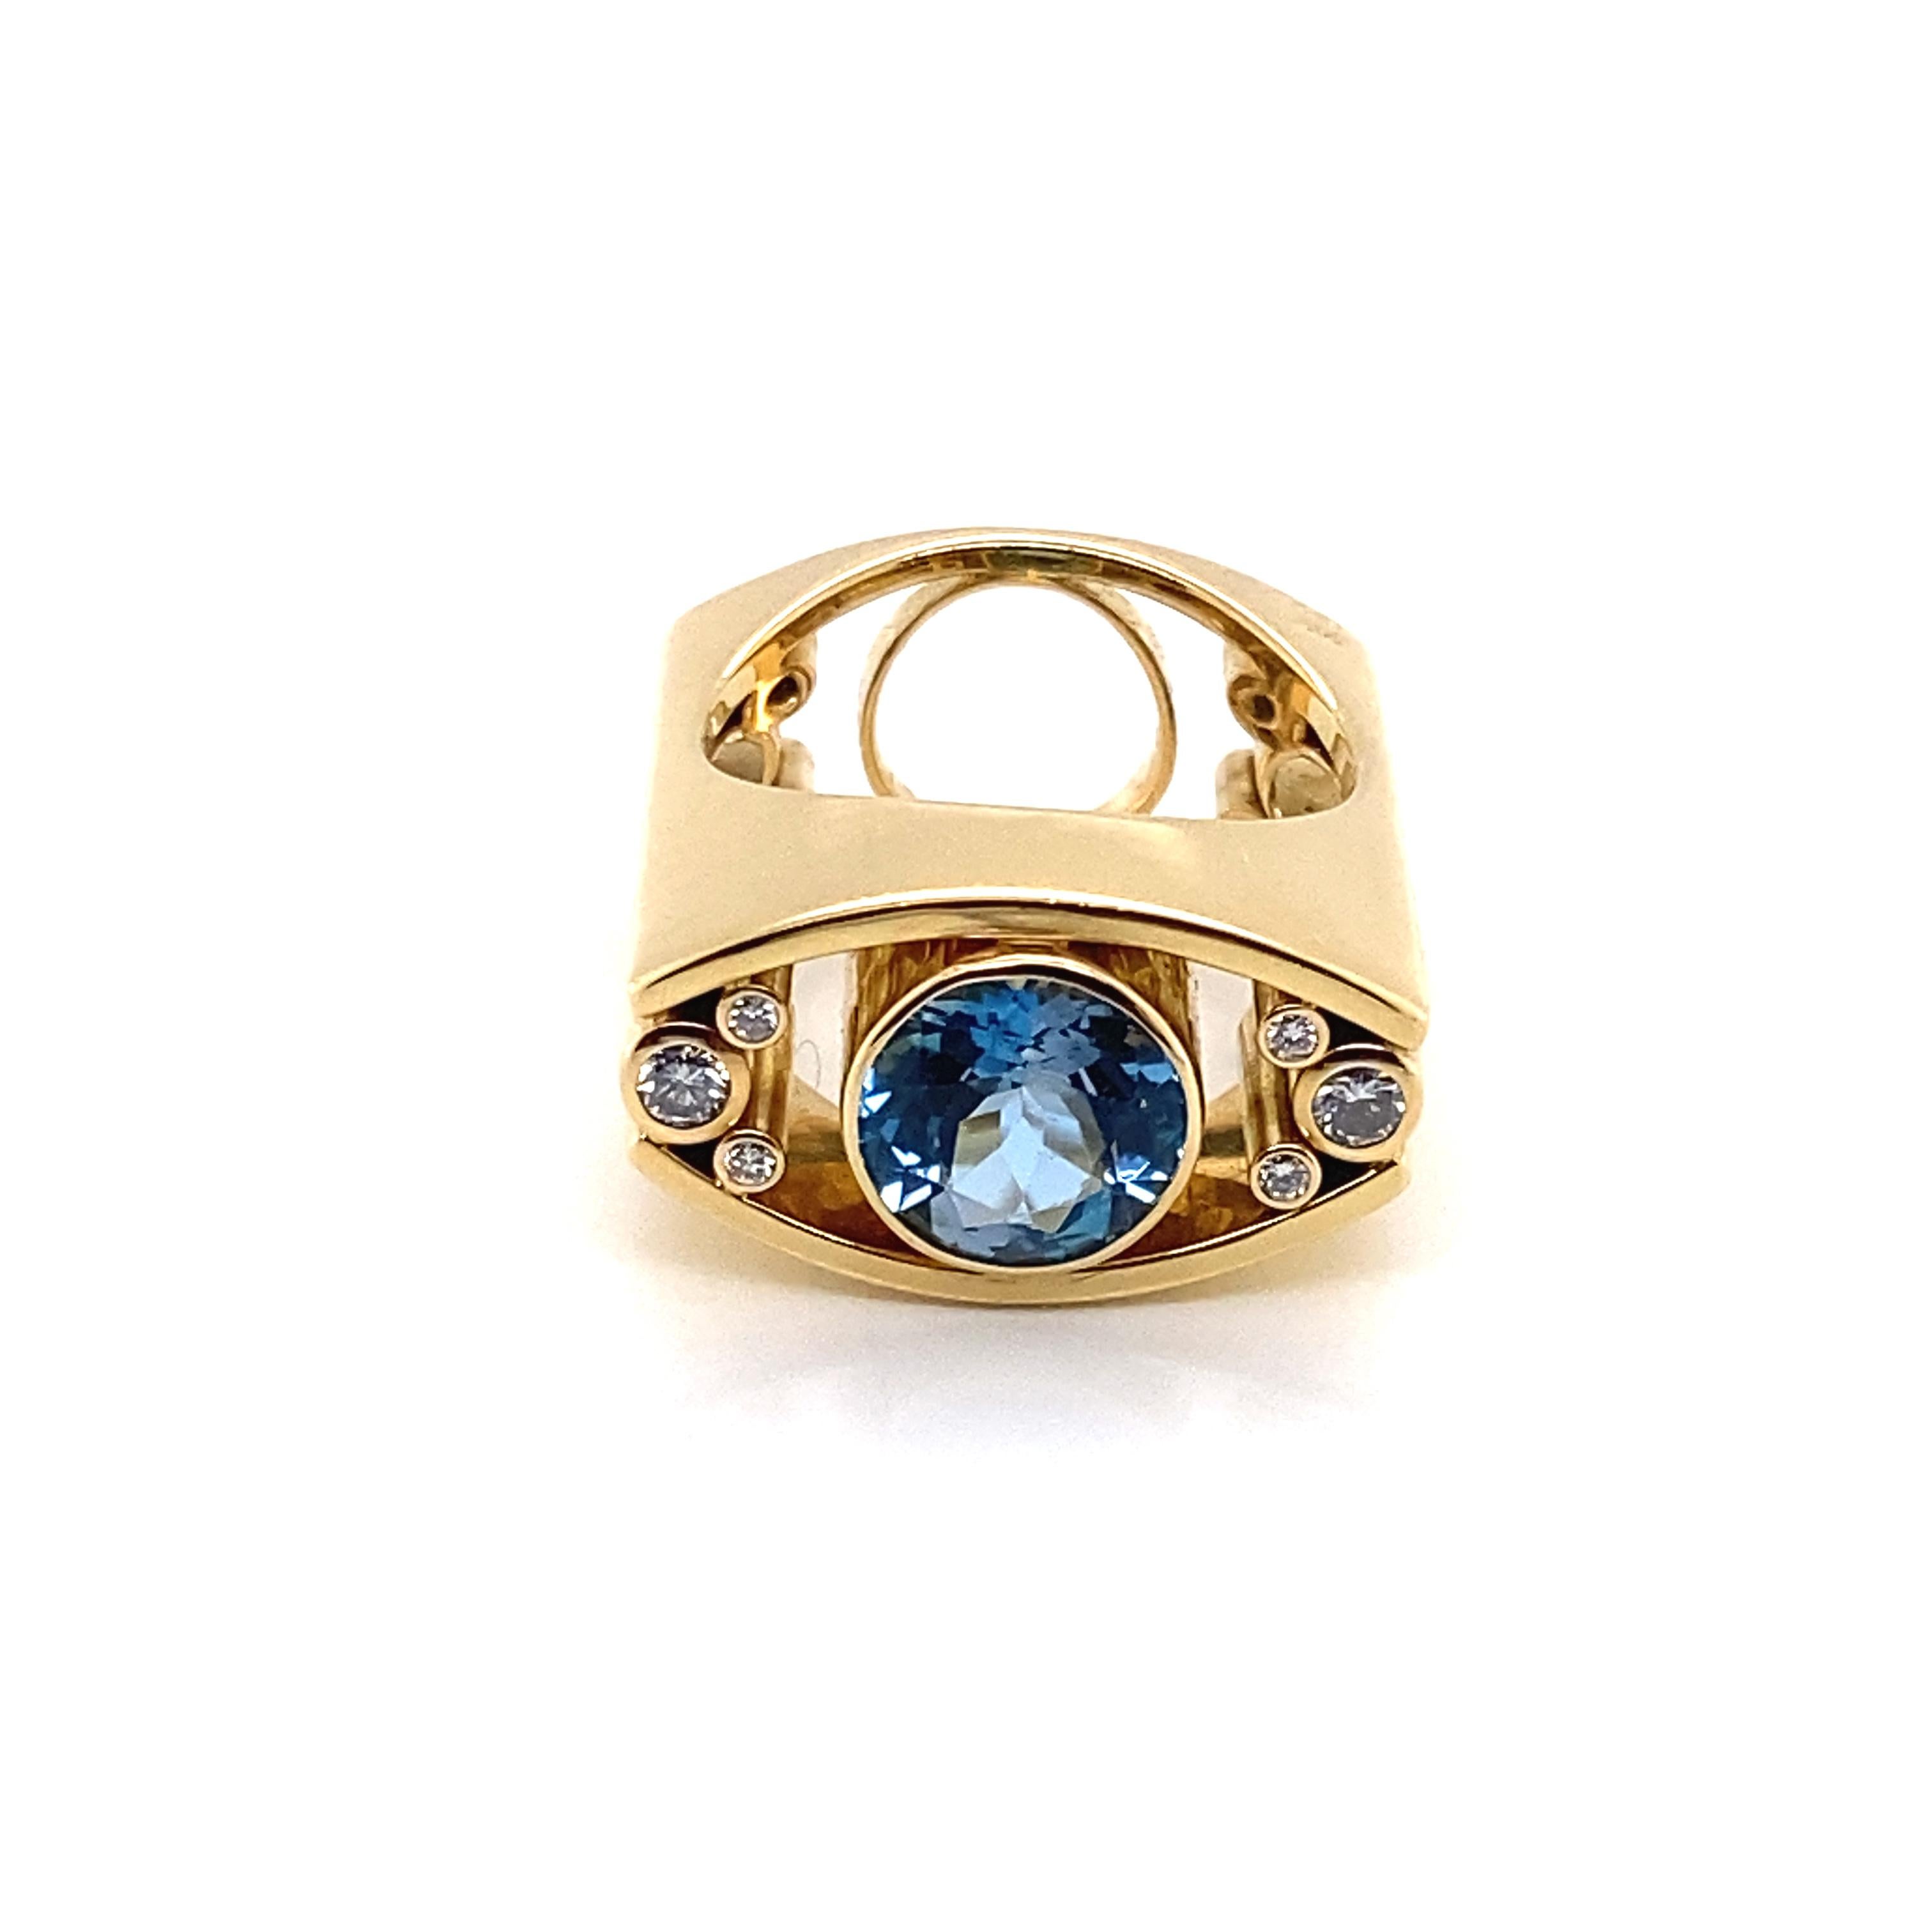 Michael Sugarman Aquamarine Ring
Stunning Handmade Architectural Designer piece.
18KY Gold
Approx. 1.50ct Round Brilliant Aquamarine
Approx. .24ct total weight in Round Brilliant Diamonds
1'' tall and .80'' wide
